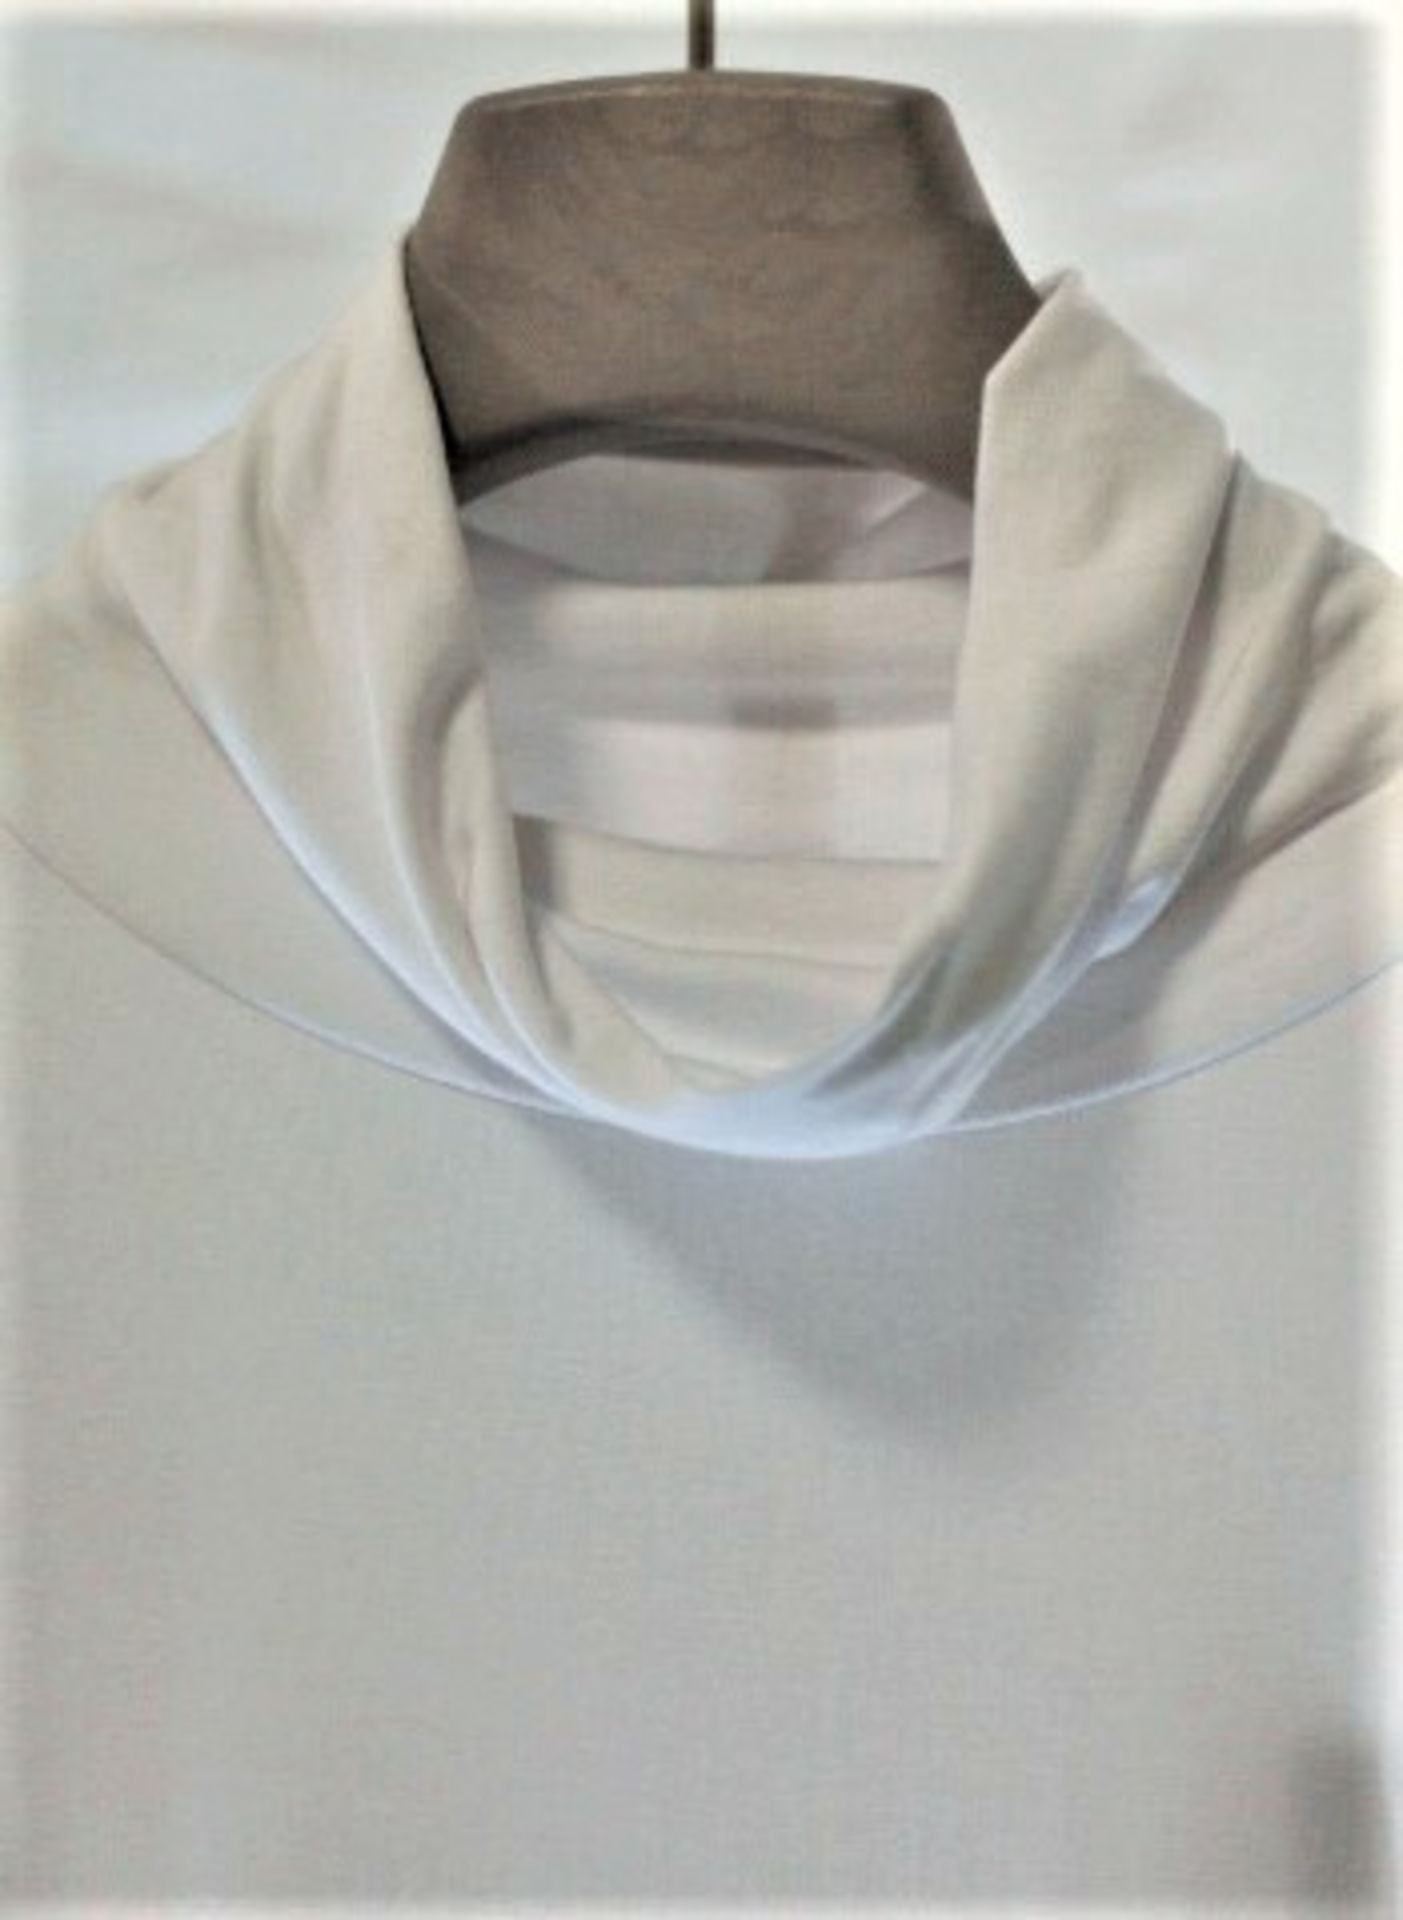 1 x Alpha Studio White Turtle Neck - Size: 18 - Material: 92% Viscose, 8% Elastane - From a High End - Image 2 of 3